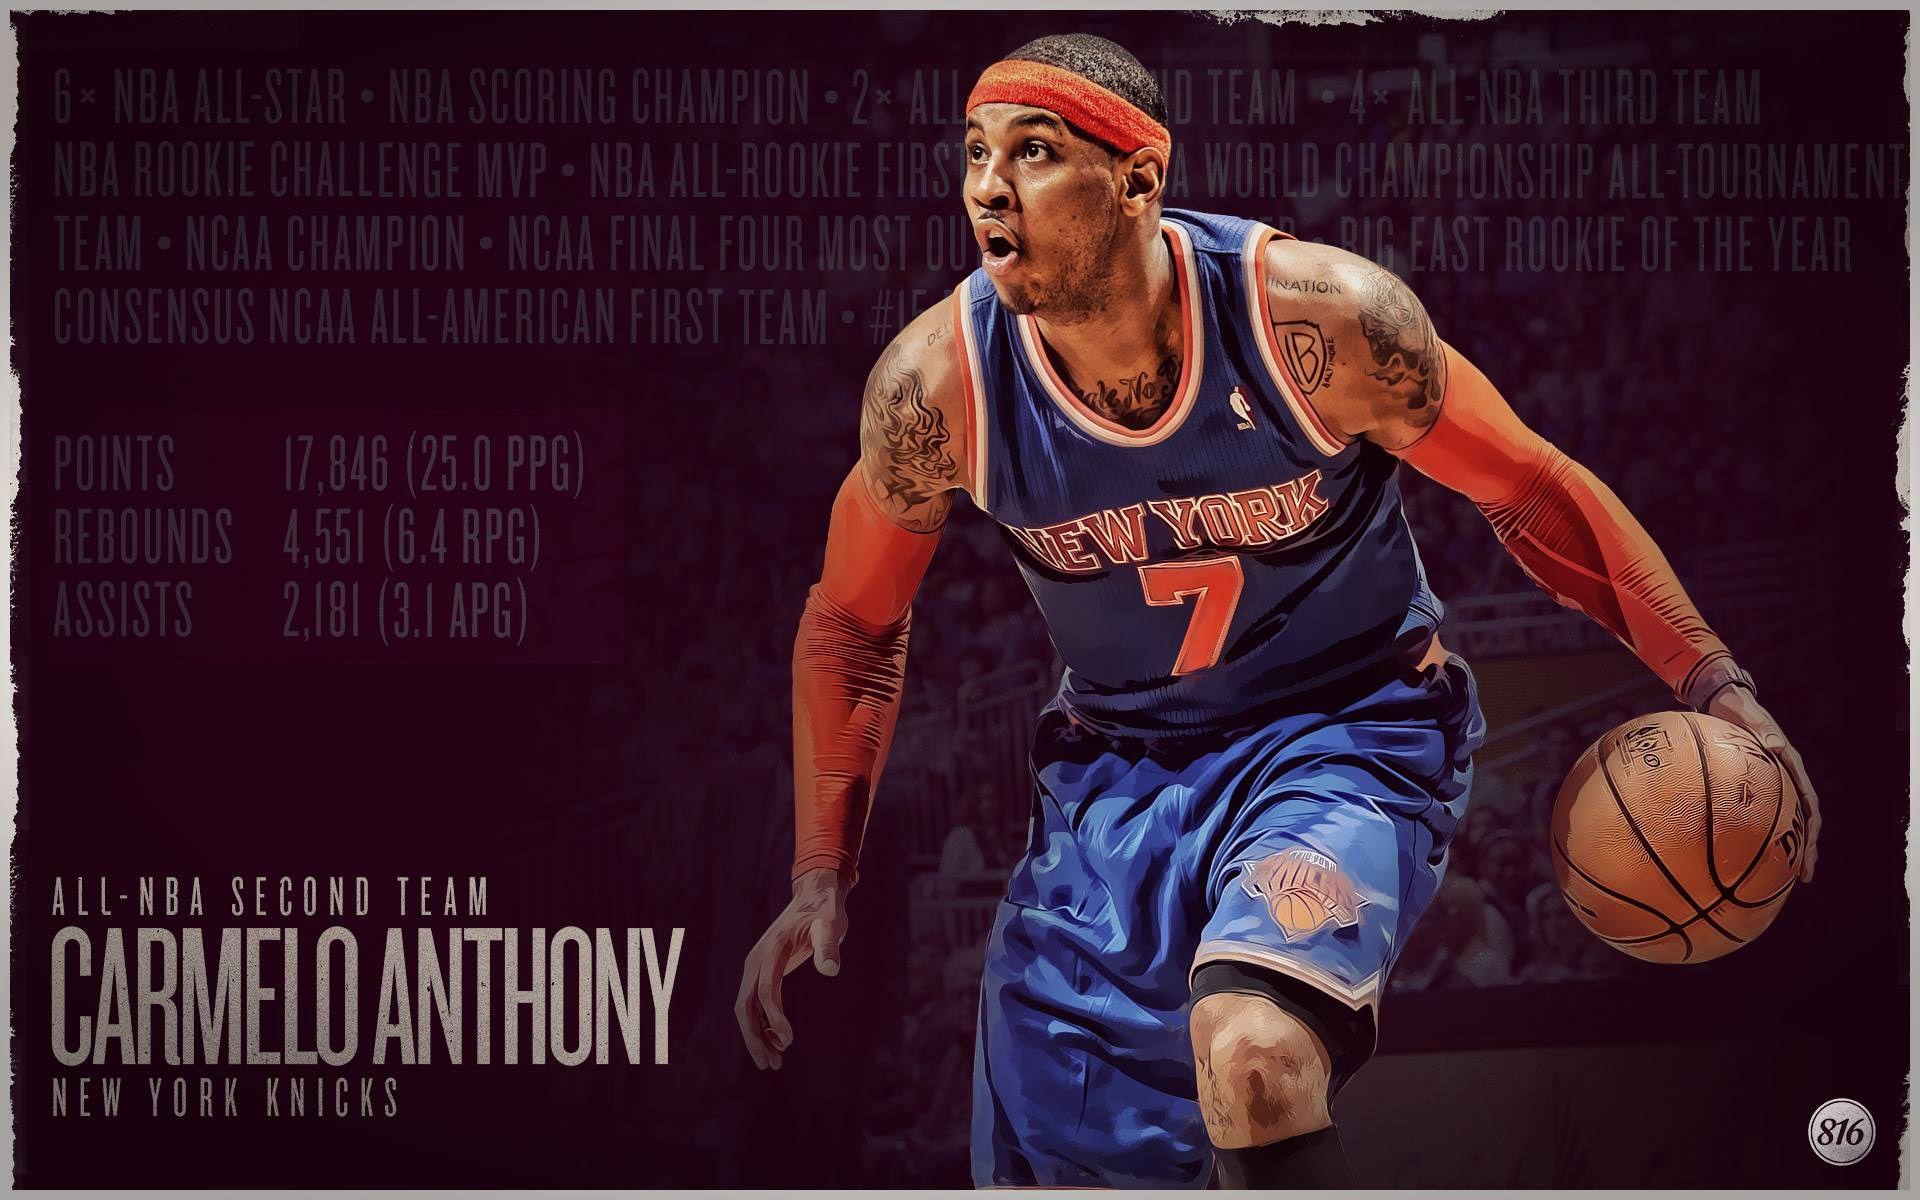 Carmelo Anthony 2013 All NBA Second Team 1920x1200 Wallpaper